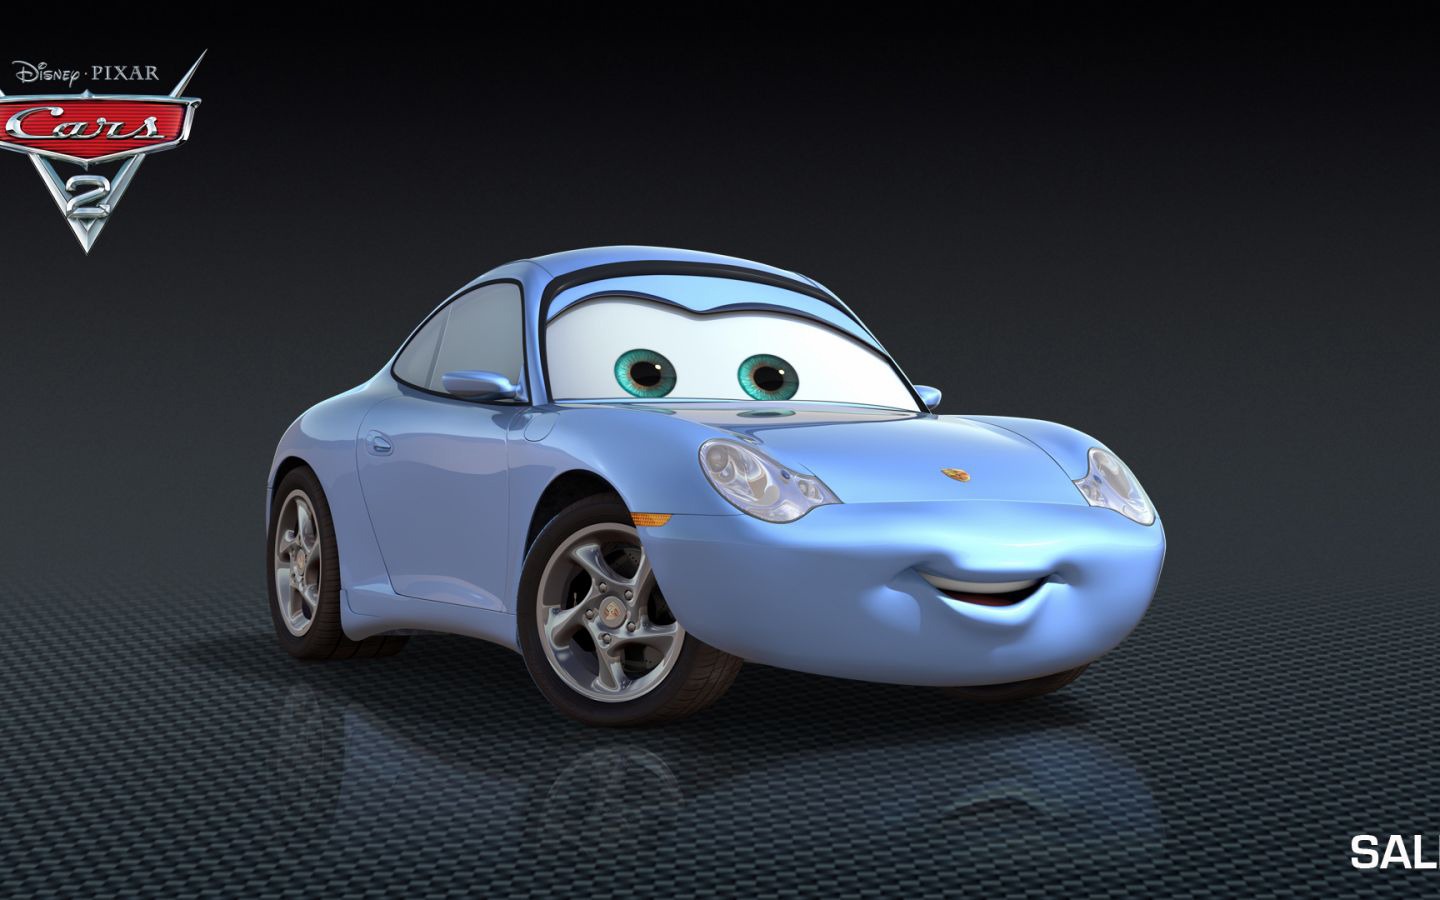 Cars 2 wallpapers #14 - 1440x900